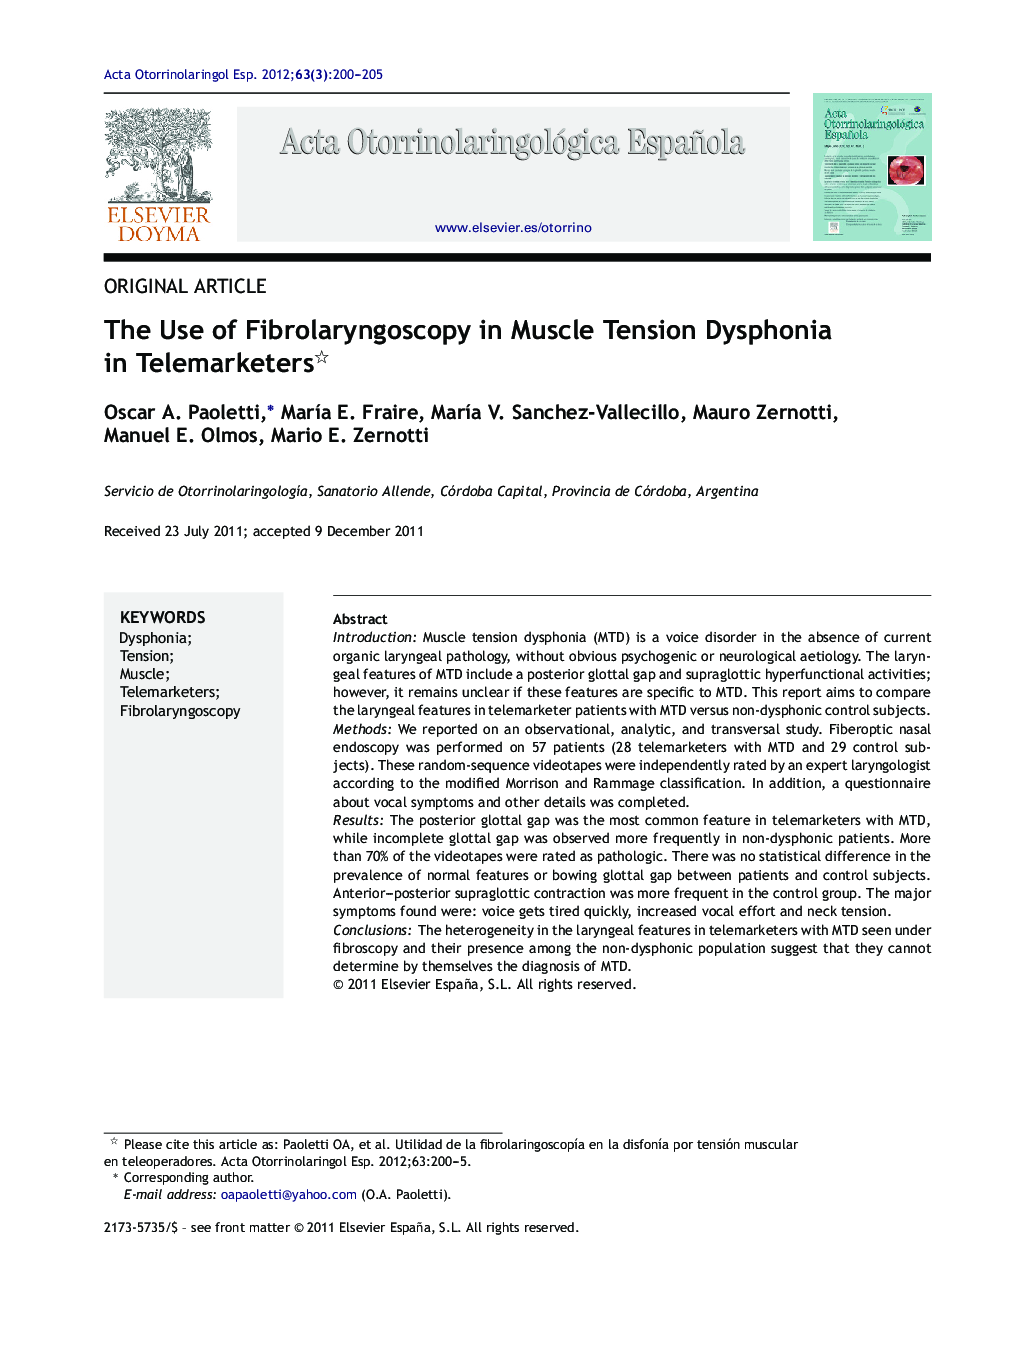 The Use of Fibrolaryngoscopy in Muscle Tension Dysphonia in Telemarketers 